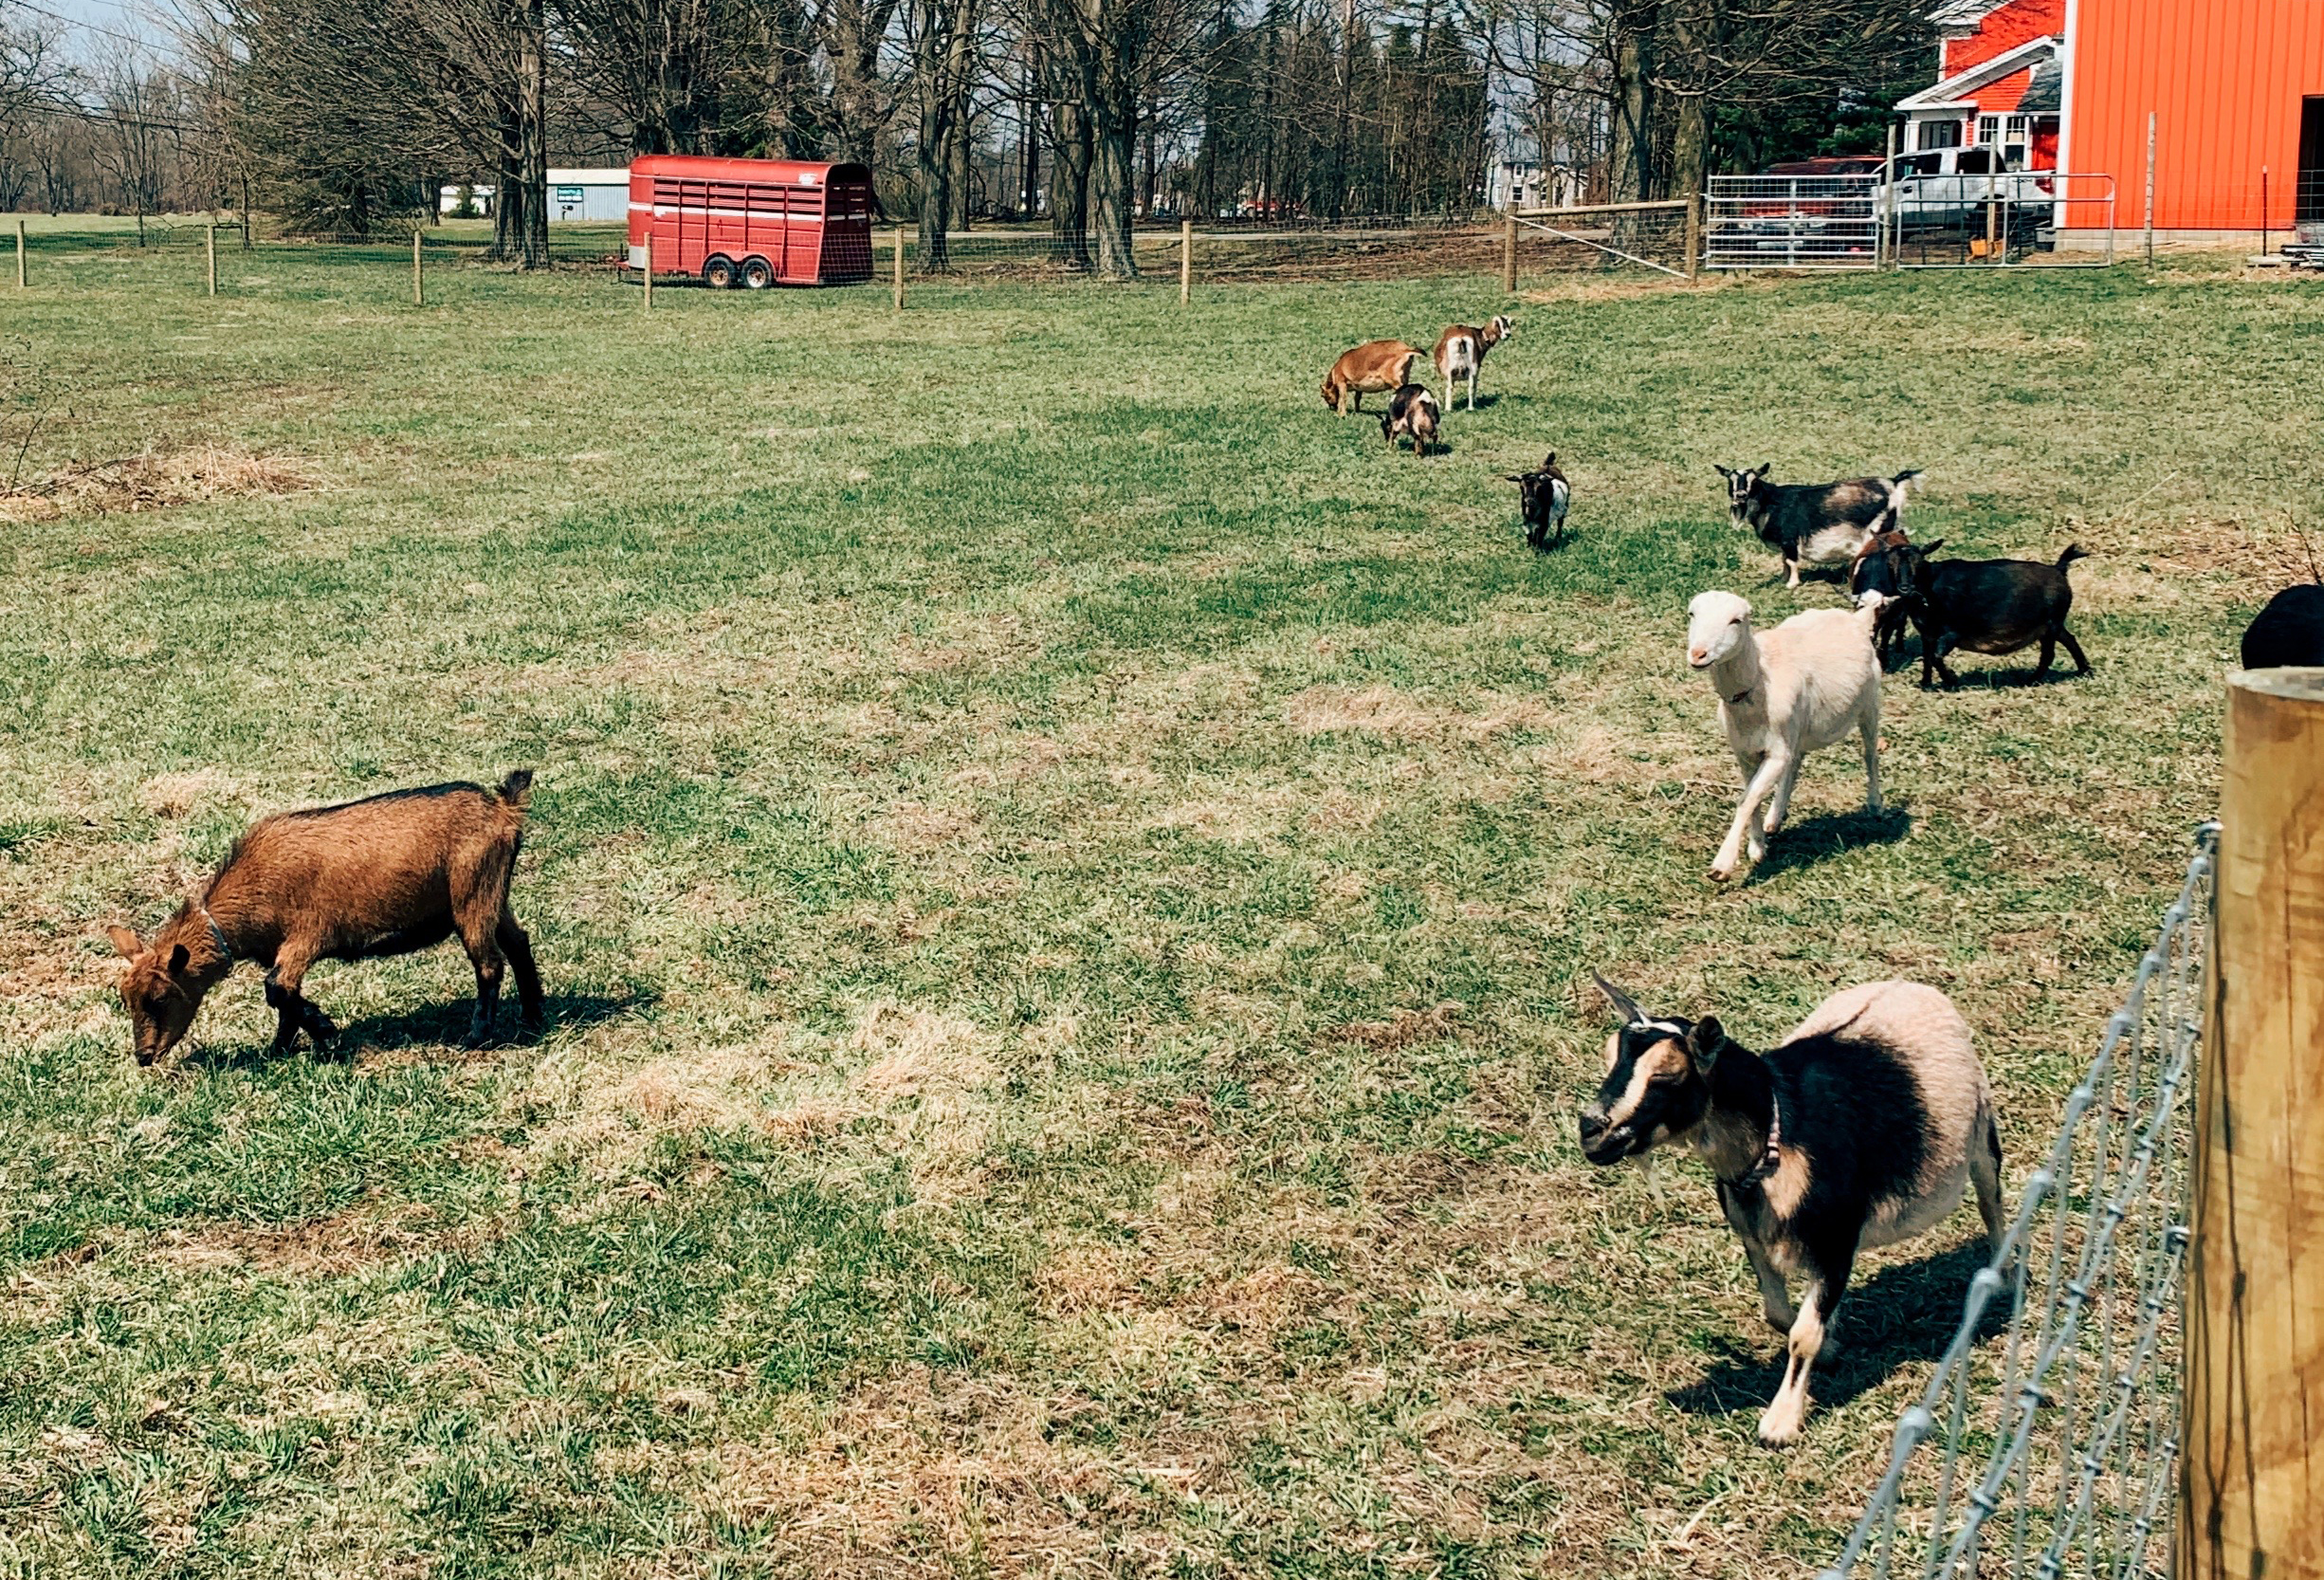 Our herd outside, April 2021